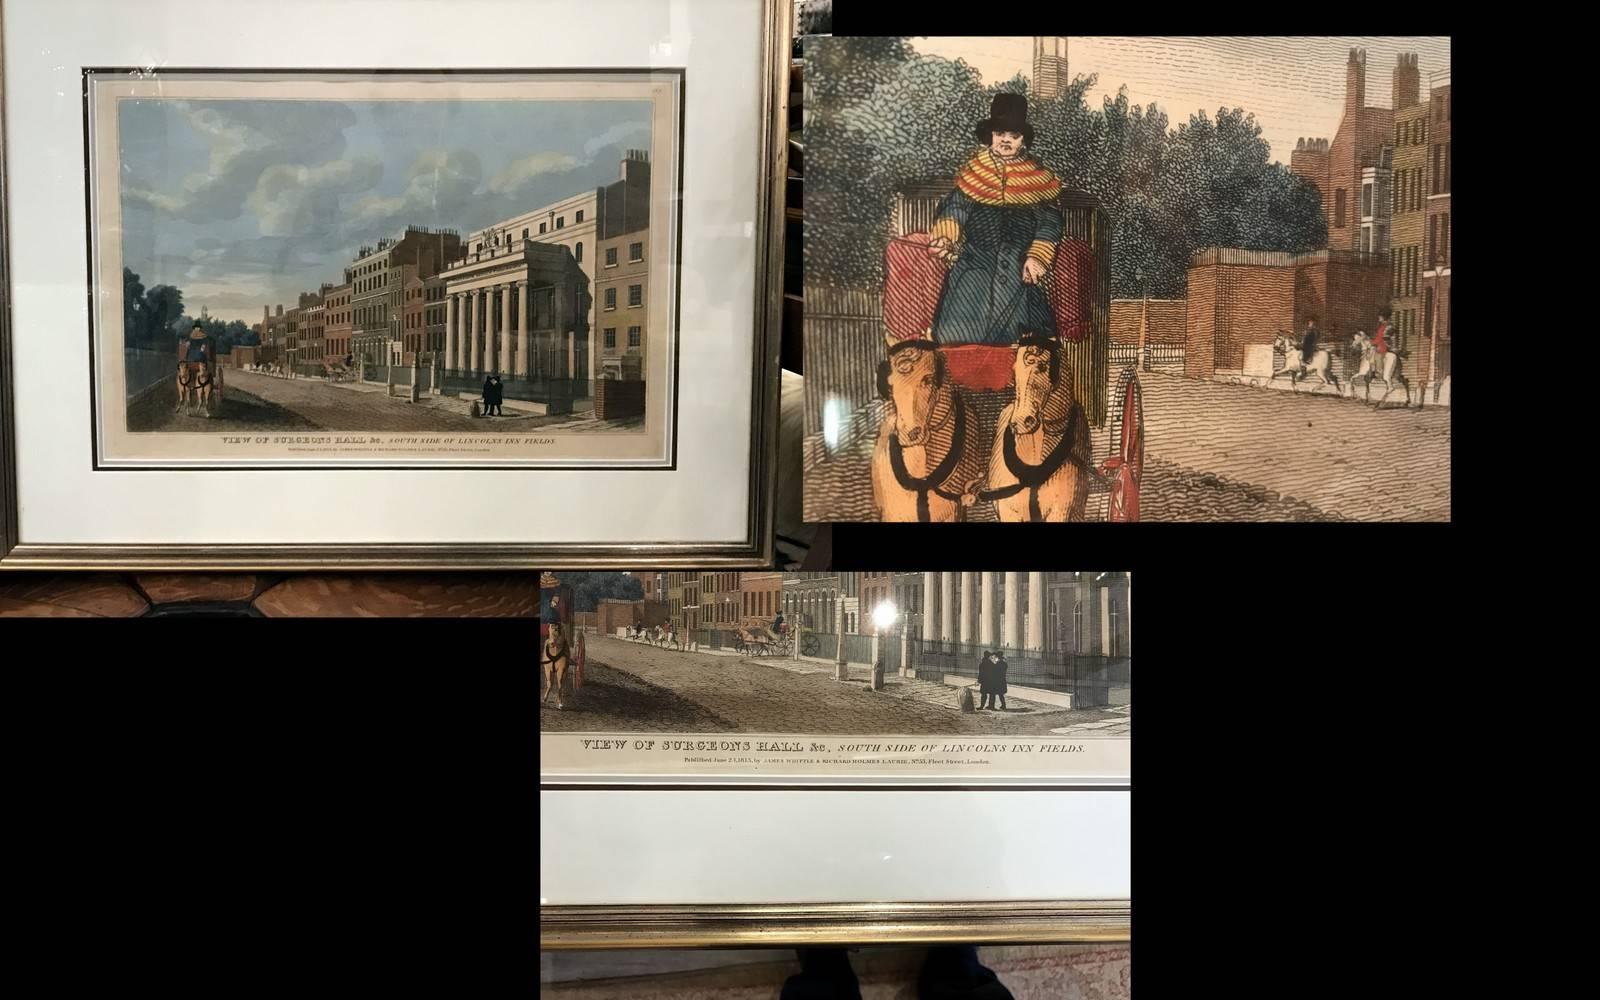 A set of four antique copper aqua tint engravings of important English buildings. Early 19th original prints from 1814, London, by Whittle and Laurie. The frames are 20th century with triple mats and glass, Frames showing some signs or age, overall